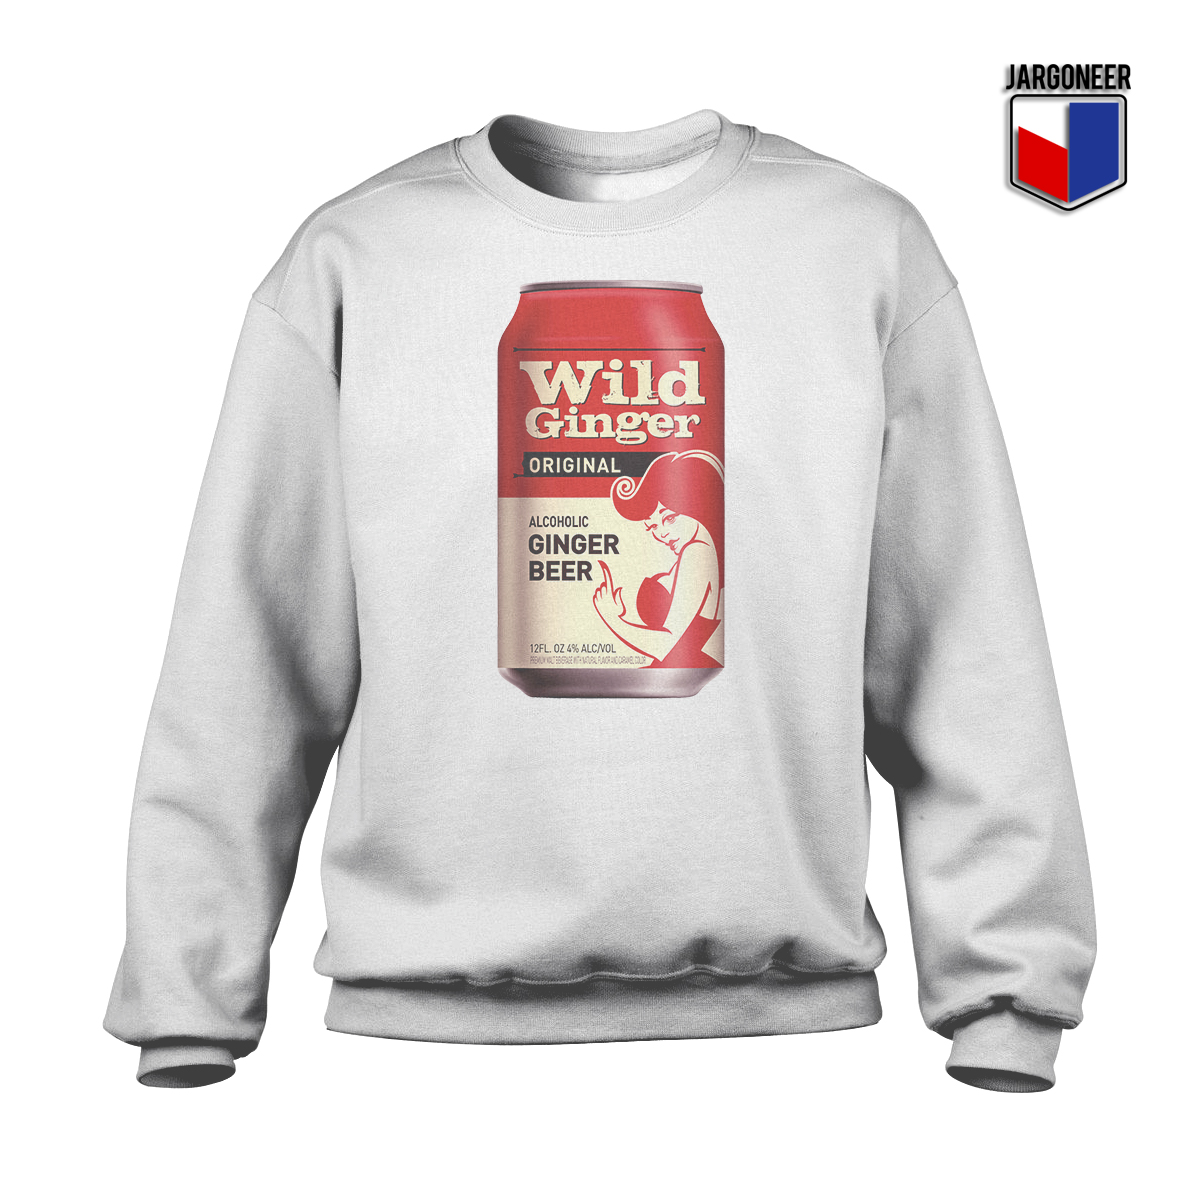 Wild Ginger Tin White SS - Shop Unique Graphic Cool Shirt Designs